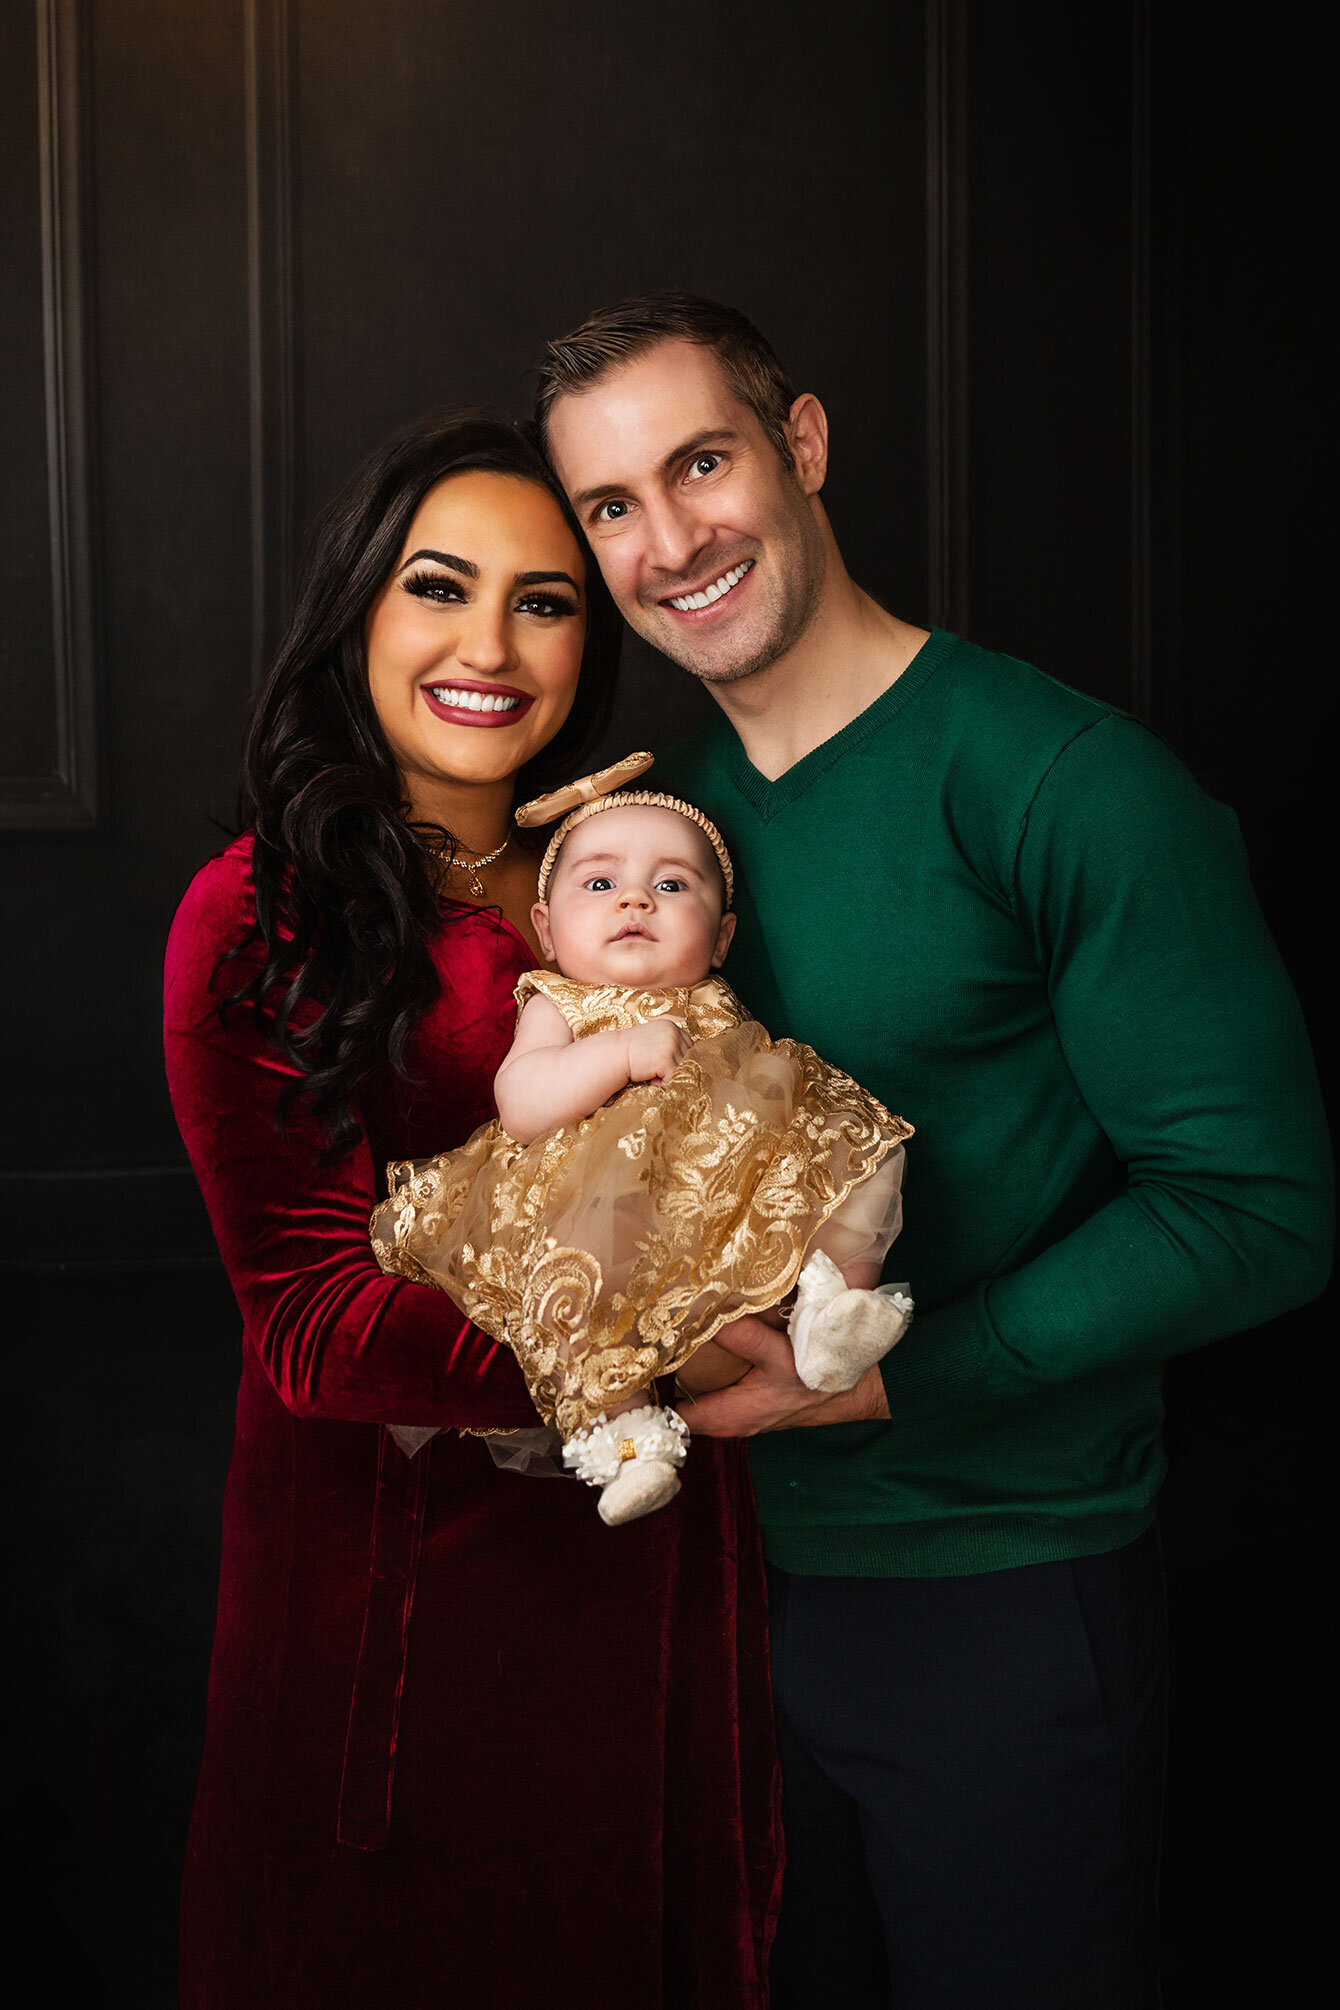 studio-family-portrait-with-baby-vanity-fair-colorful-finep-art